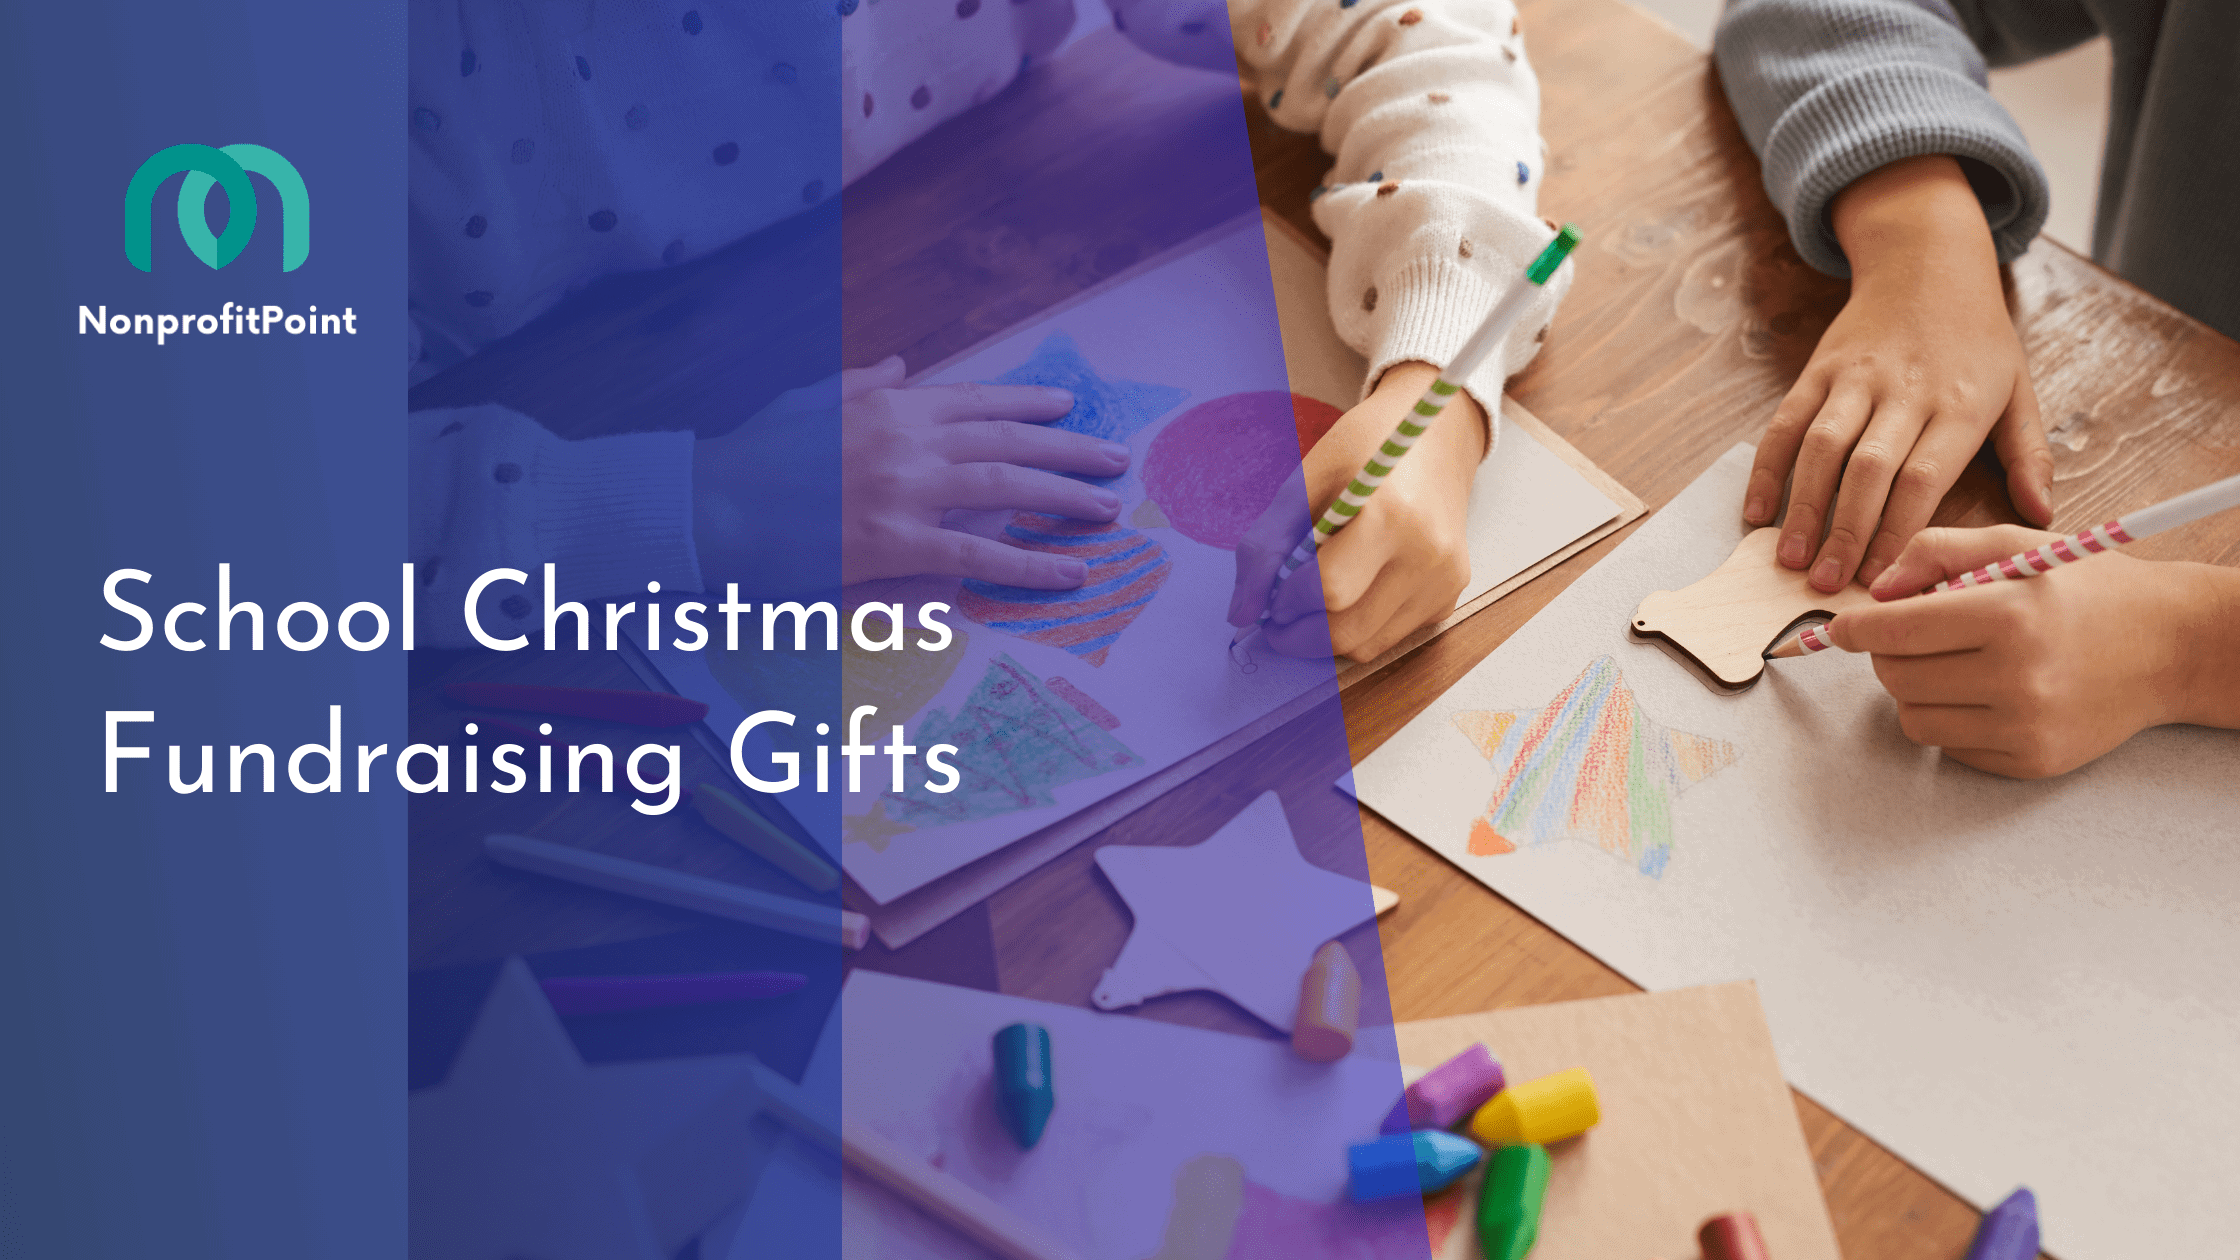 School Christmas Fundraising Gifts